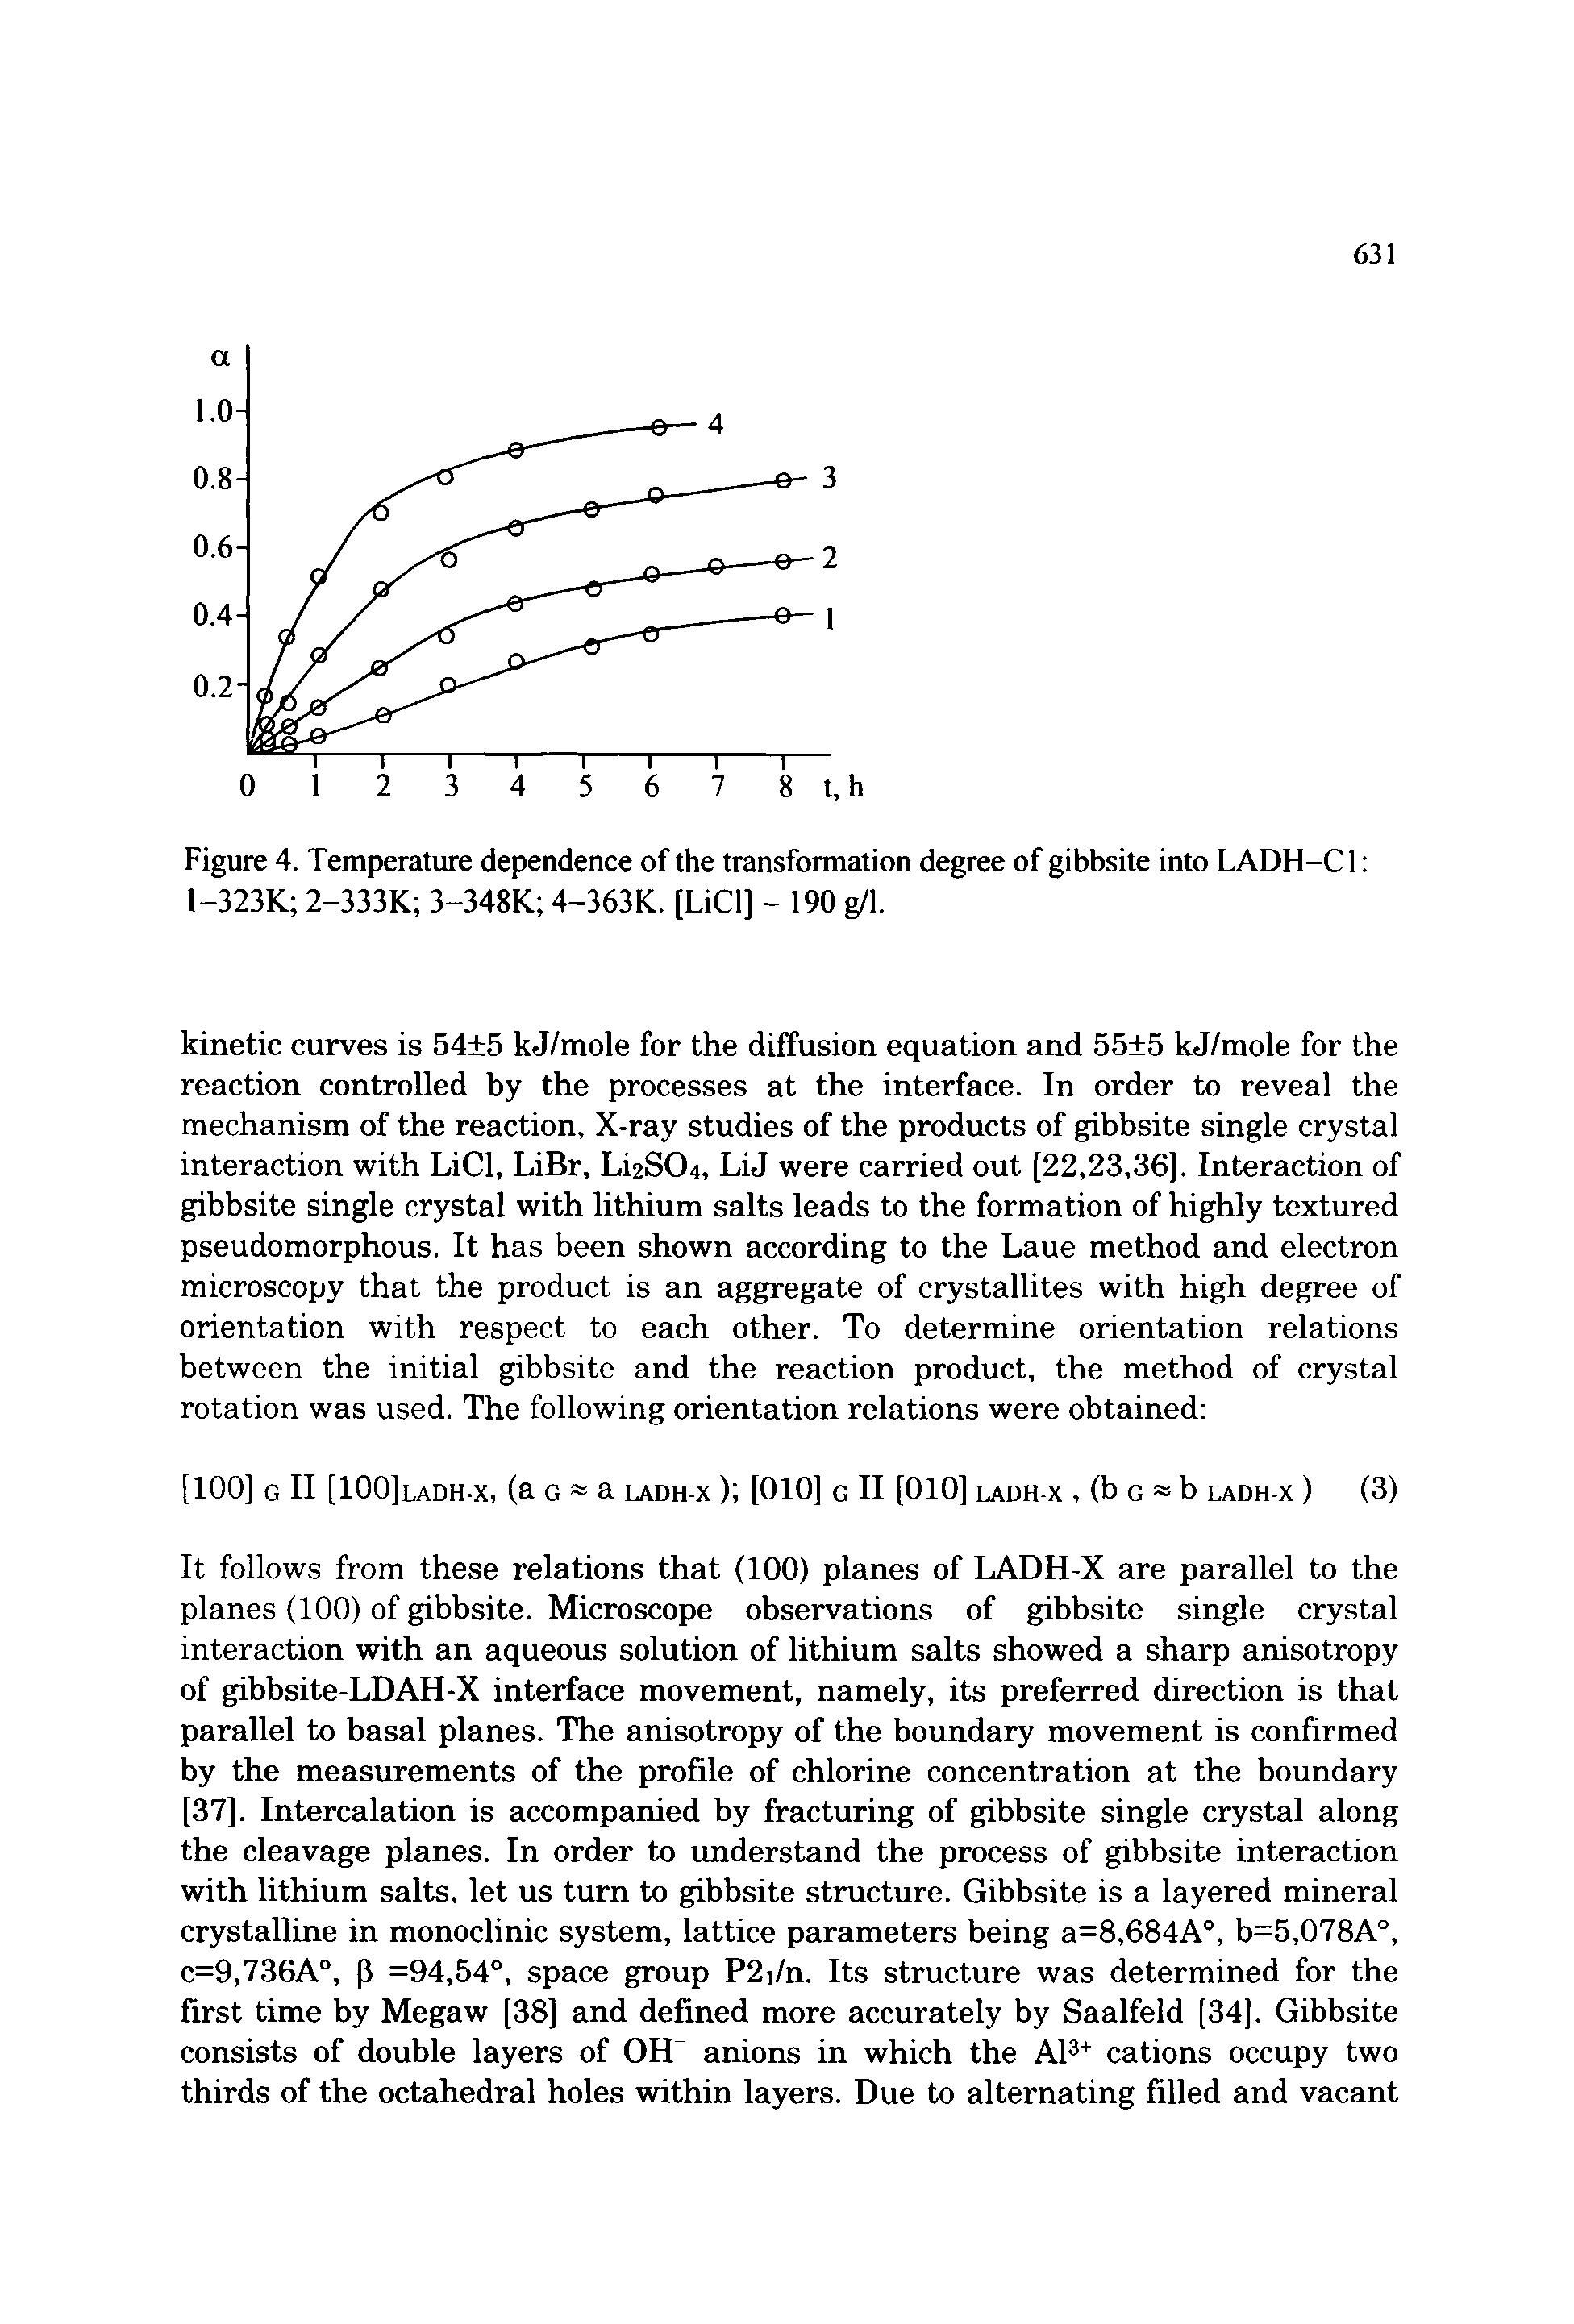 Figure 4. Temperature dependence of the transformation degree of gibbsite into LADH-CI 1-323K 2-333K 3-348K 4-363K. [LiCl] - 190 g/l.